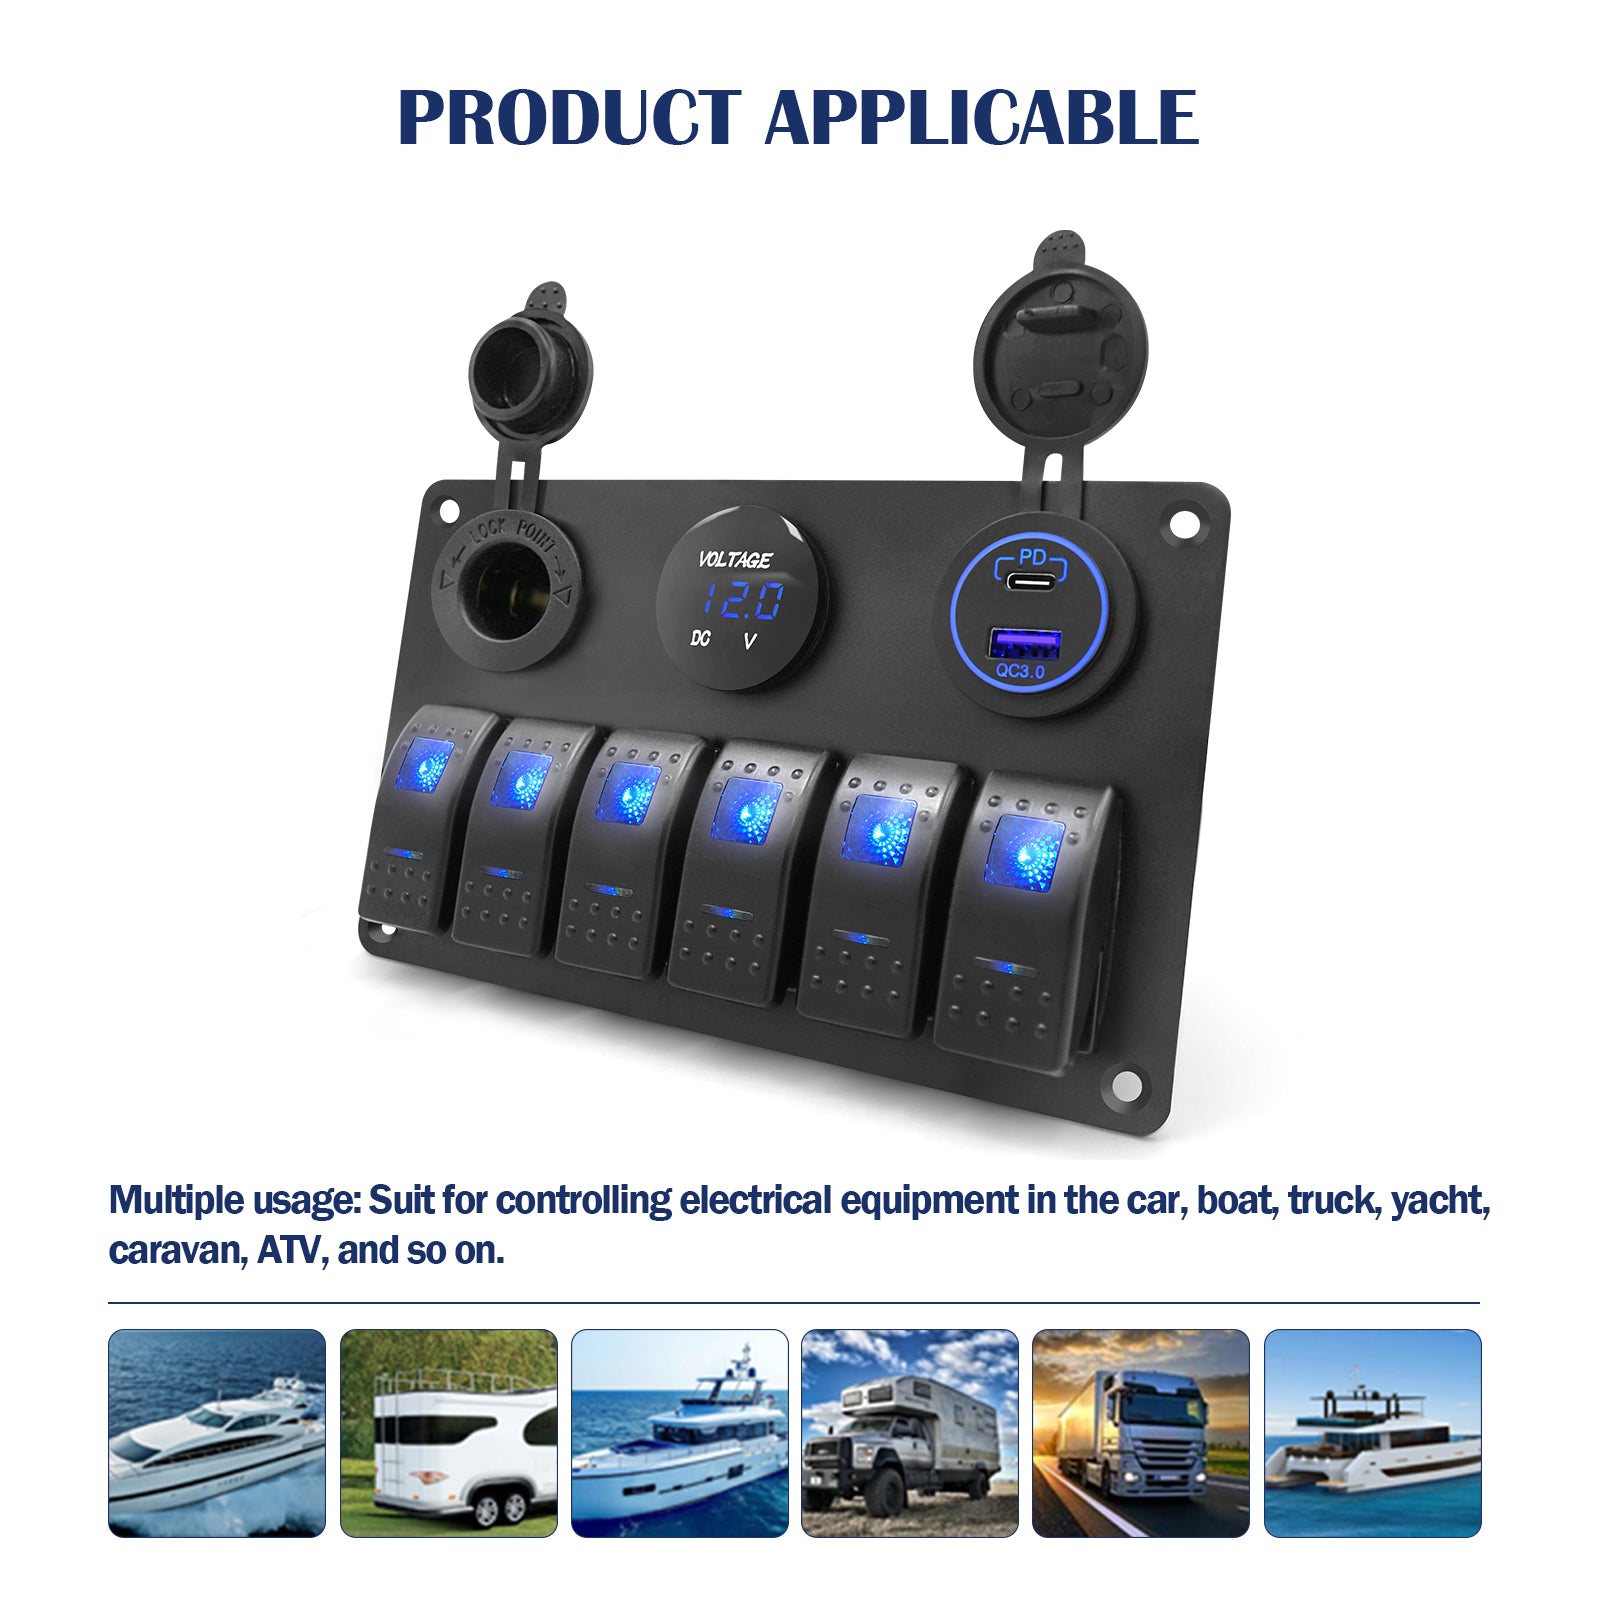 THALASSA 6 Gang Marine Boat Rocker Switch Aluminum Panel Waterproof with Blue Digital Voltage Display, Dual PD +QC3.0 USB Outlet, 12V DC Cigarette Lighter Port for Car Truck Rv Vehicles Yacht